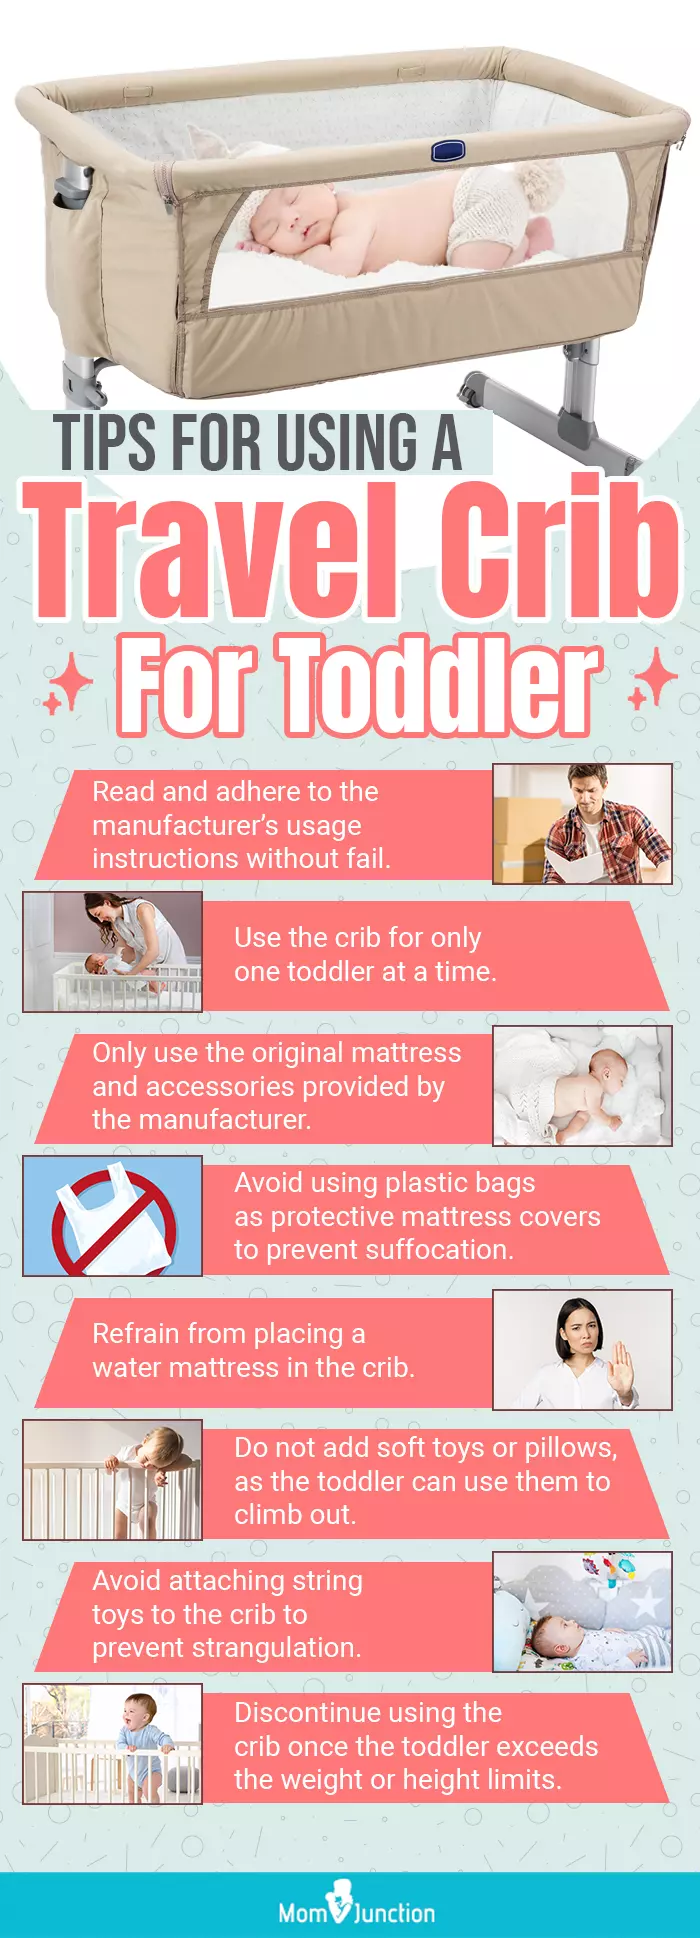 Tips For Using A Travel Crib For Toddler (infographic)